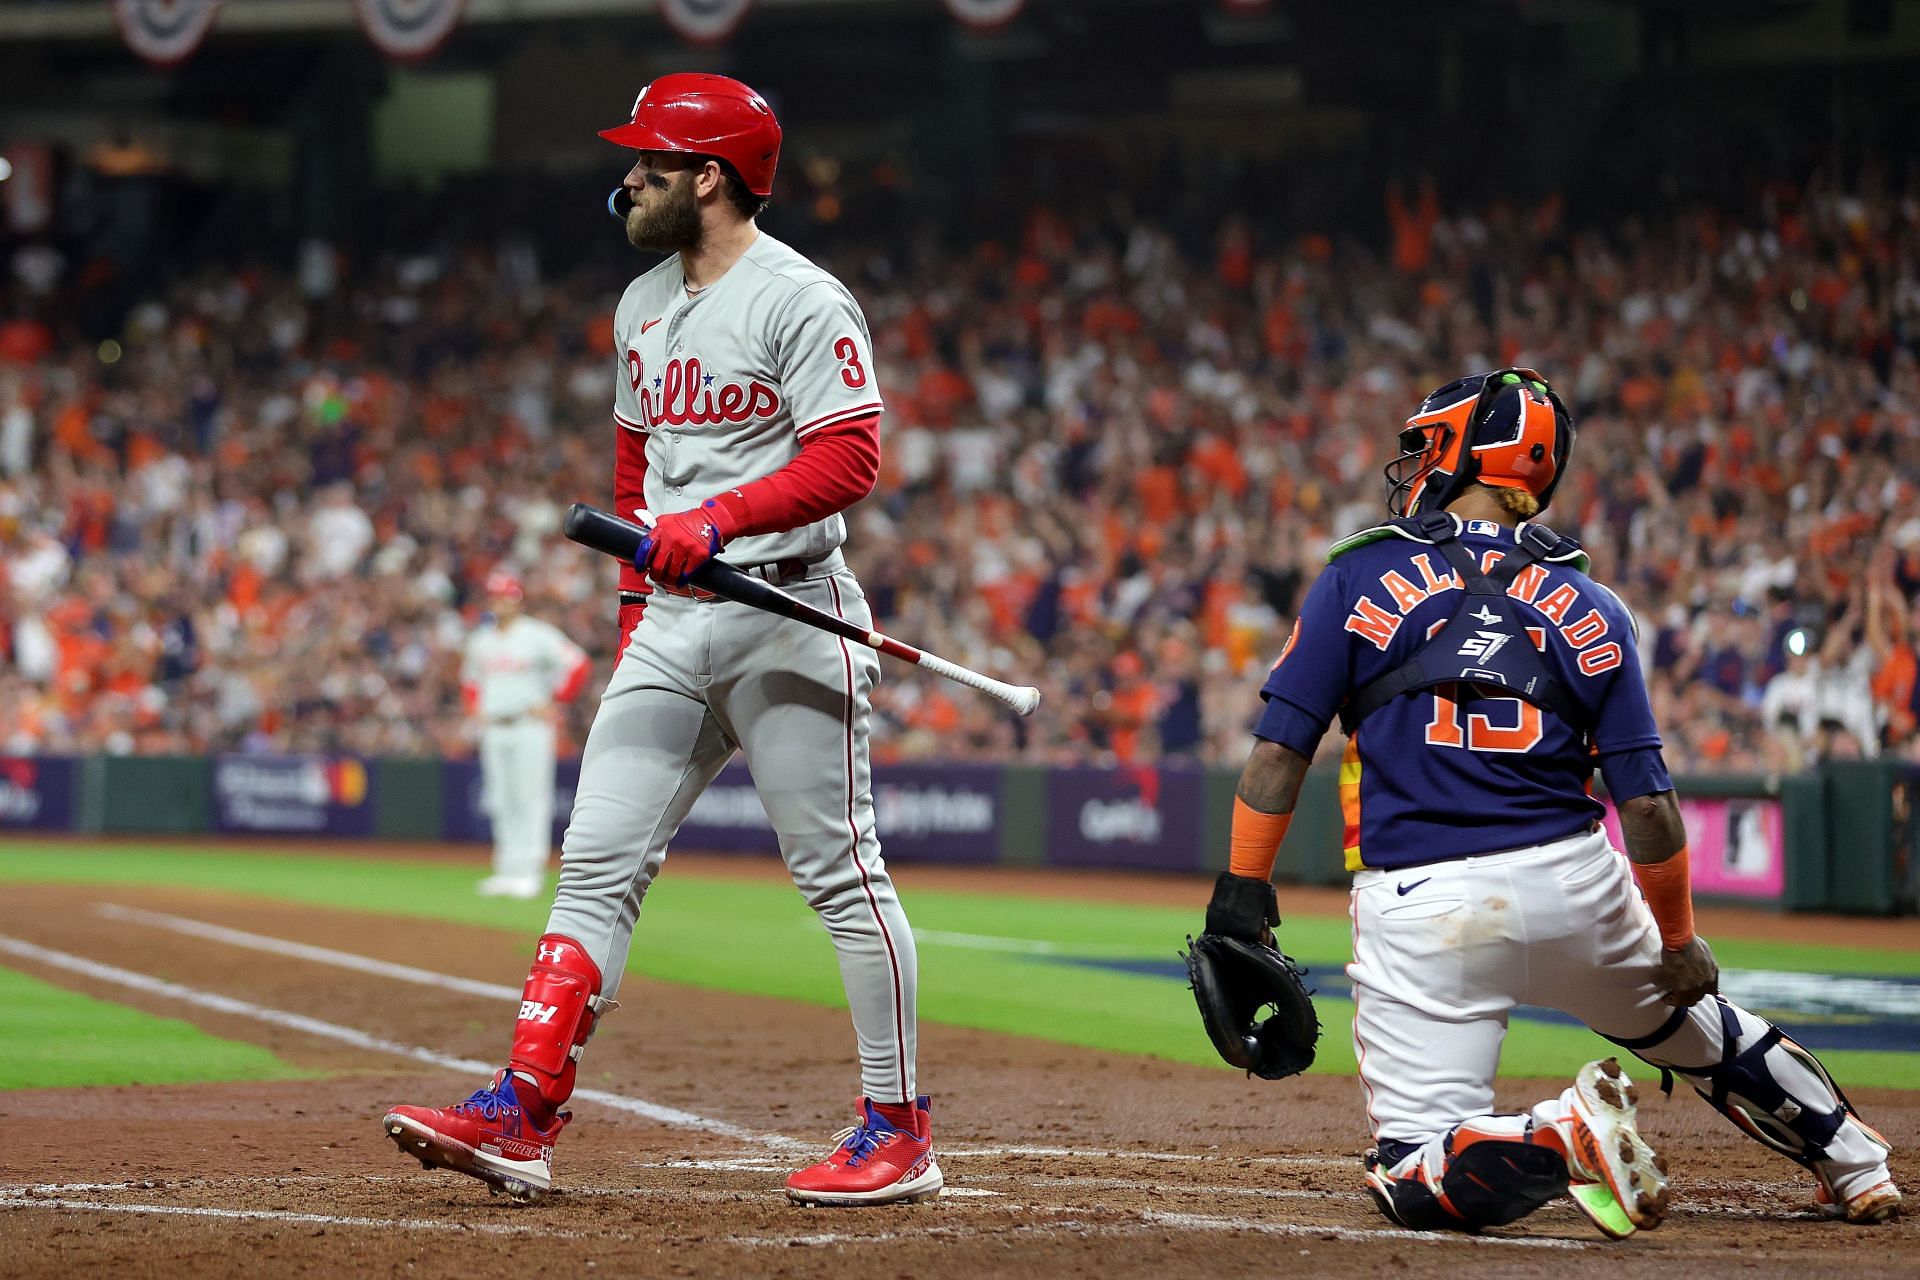 Bryce Harper WBC: Why is Phillies superstar Bryce Harper not playing in 2023  World Baseball Classic for Team USA?